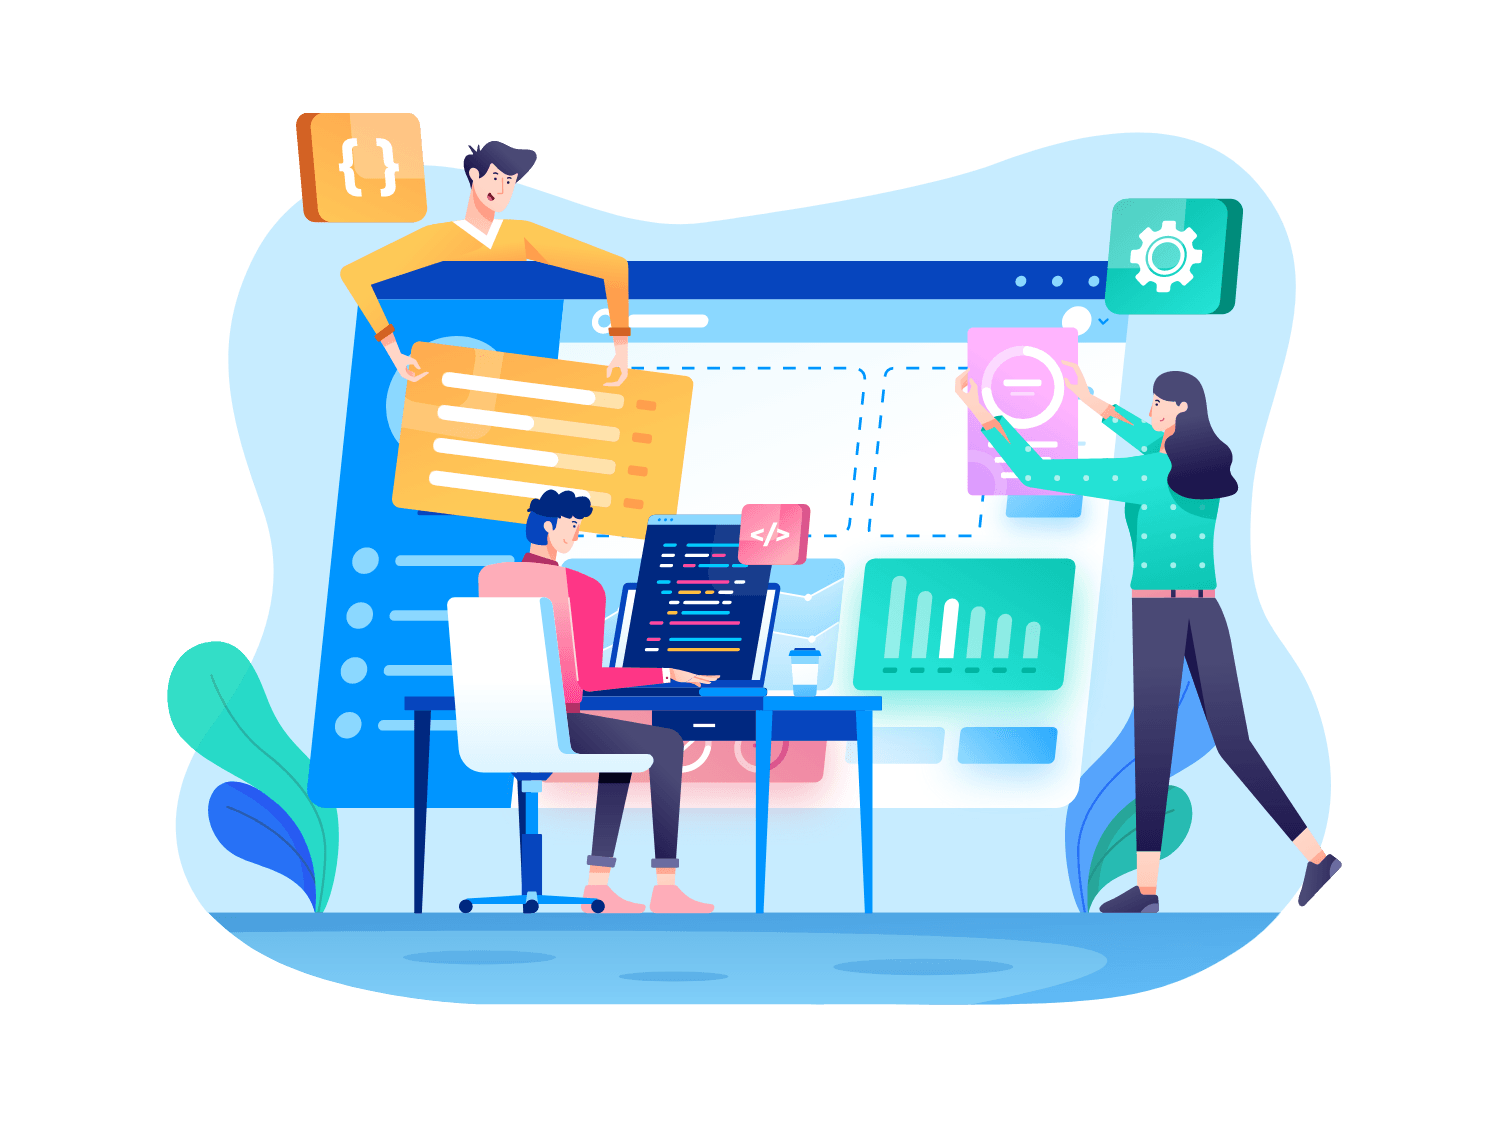 Illustration of web developers utilizing advanced tools and technologies, emphasizing Proventus Digital's commitment to cutting-edge web design and real-time site personalization.